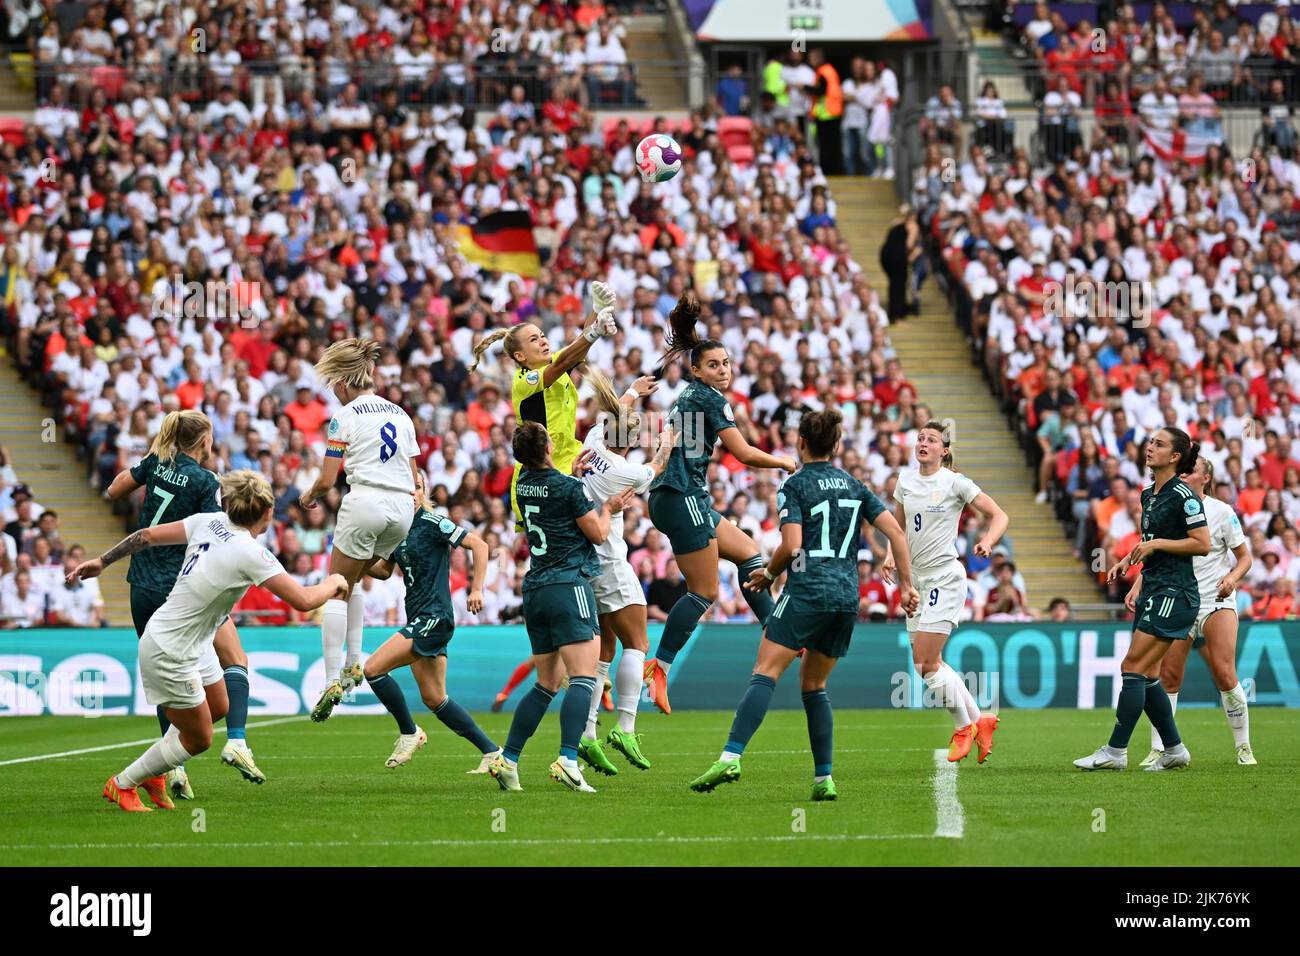 London, UK. JULY 31st. Merle Frohms of Germany makes a save during the UEFA Women's European Championship match between England and Germany at Wembley Stadium, London on Sunday 31st July 2022. (Credit: Pat Scaasi | MI News) Credit: MI News & Sport /Alamy Live News Stock Photo